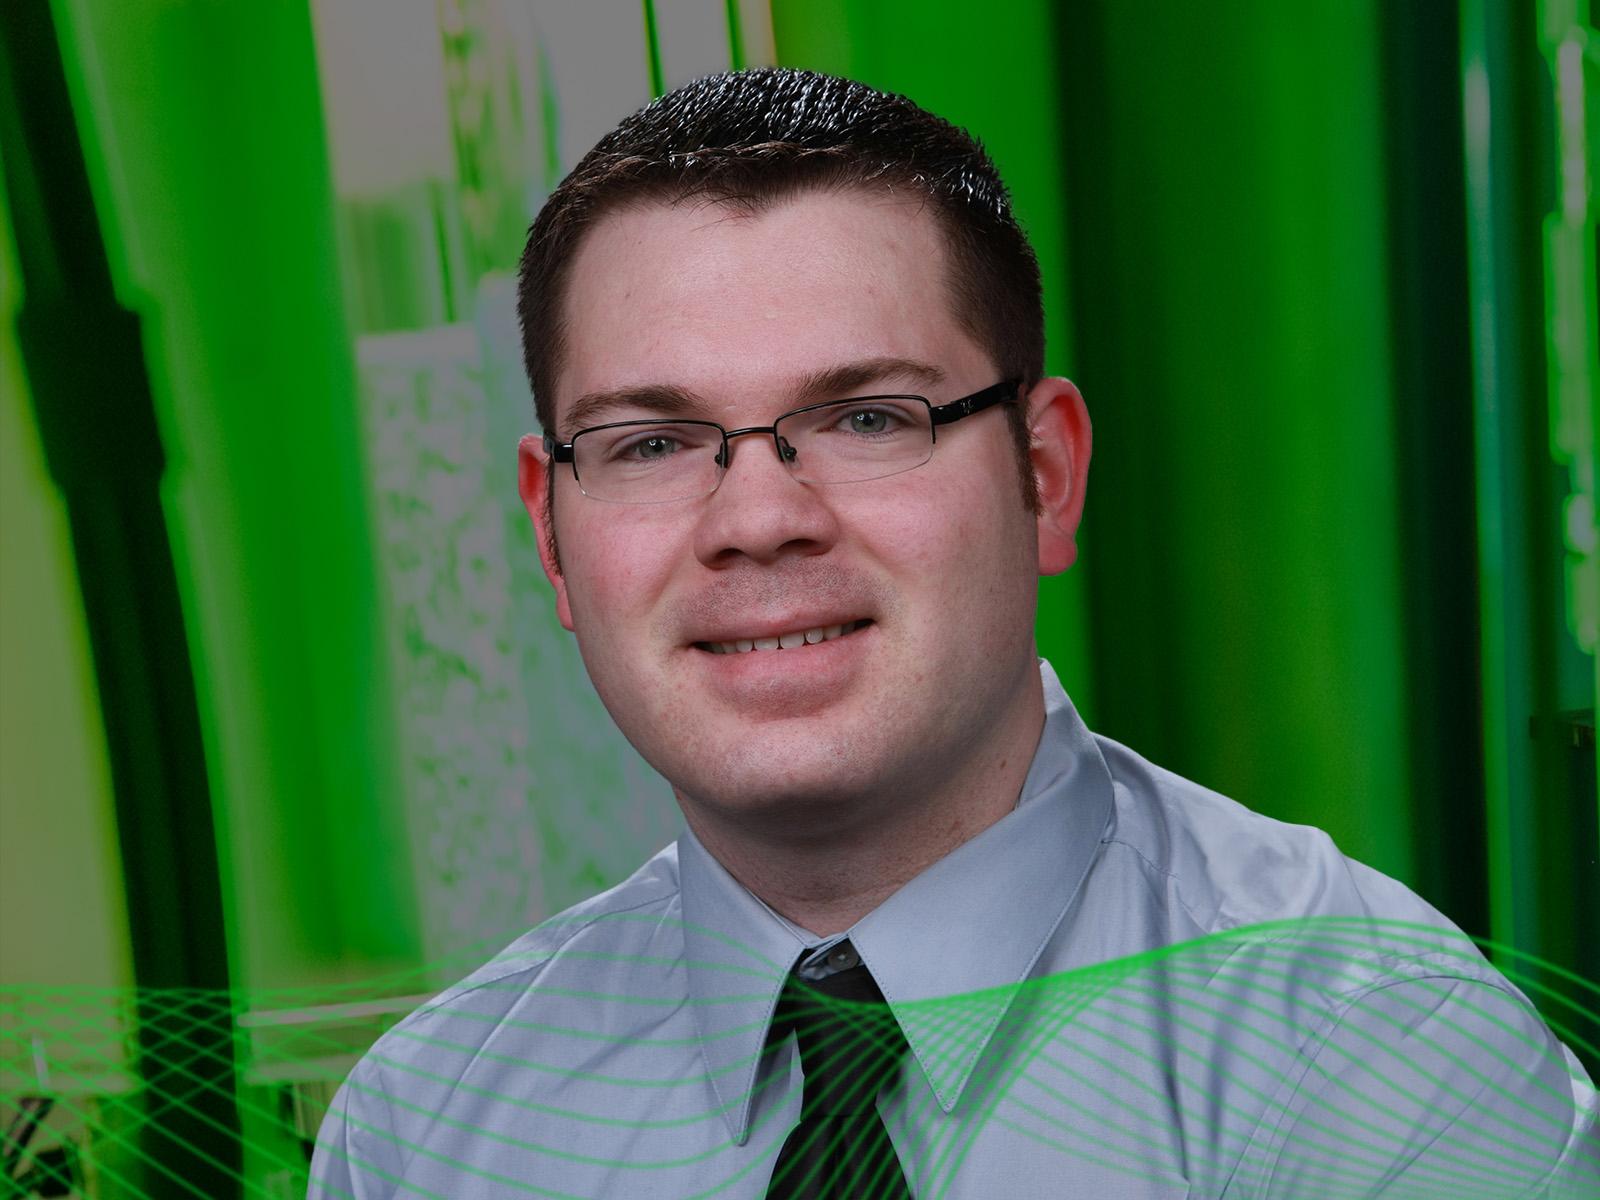 Adam Roberts wearing a collared shirt and tie in front of a green background